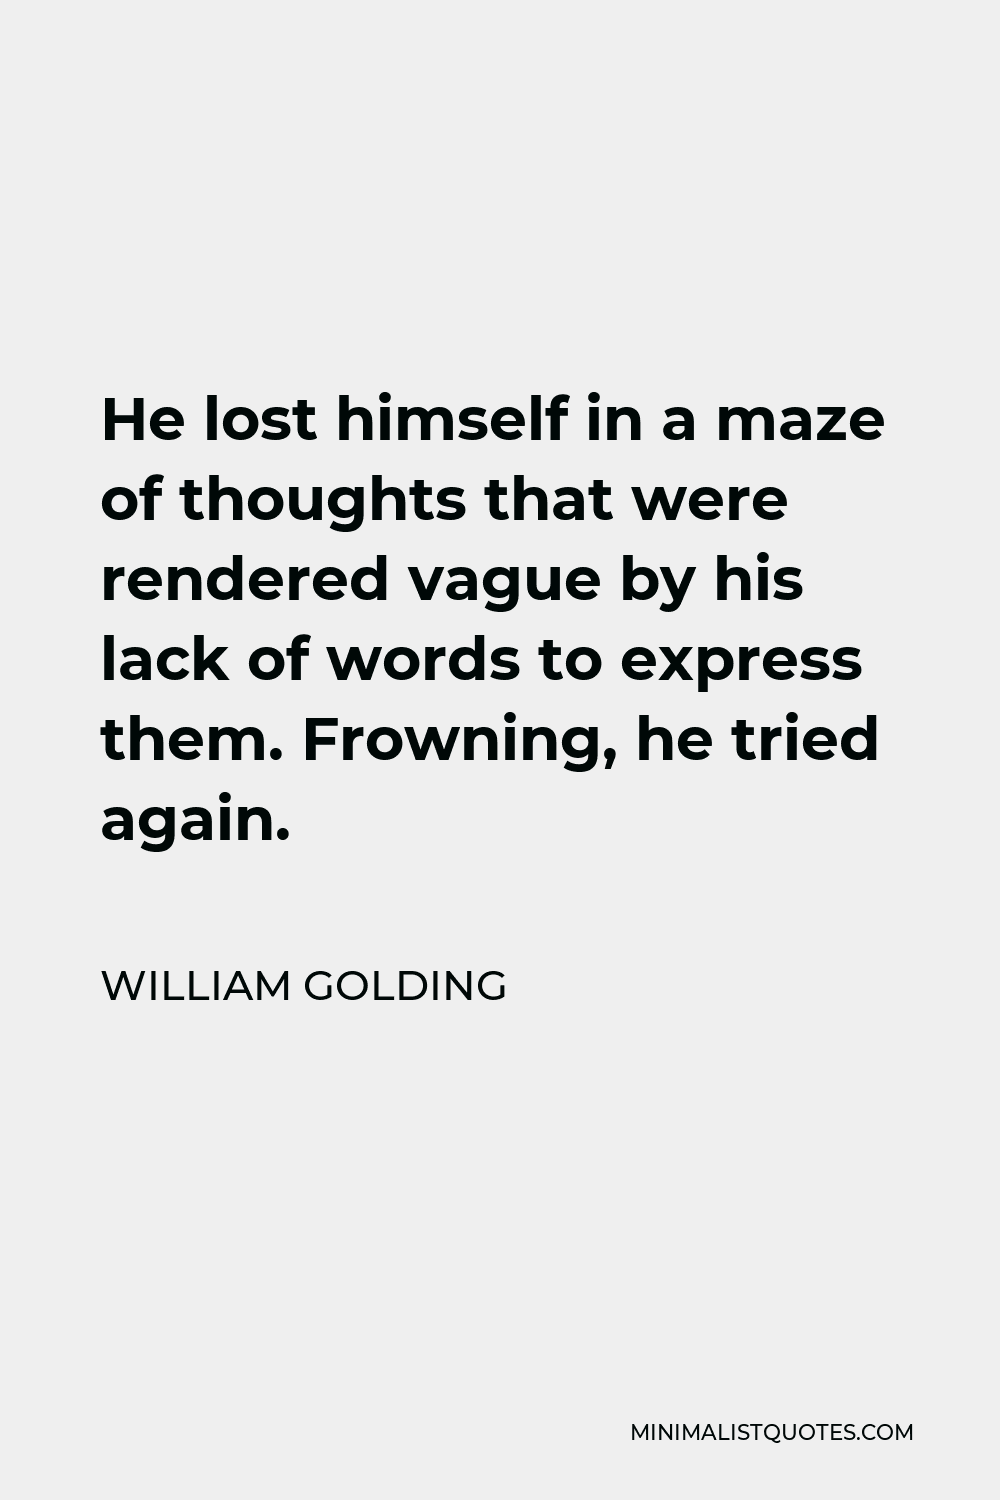 William Golding Quote - He lost himself in a maze of thoughts that were rendered vague by his lack of words to express them. Frowning, he tried again.